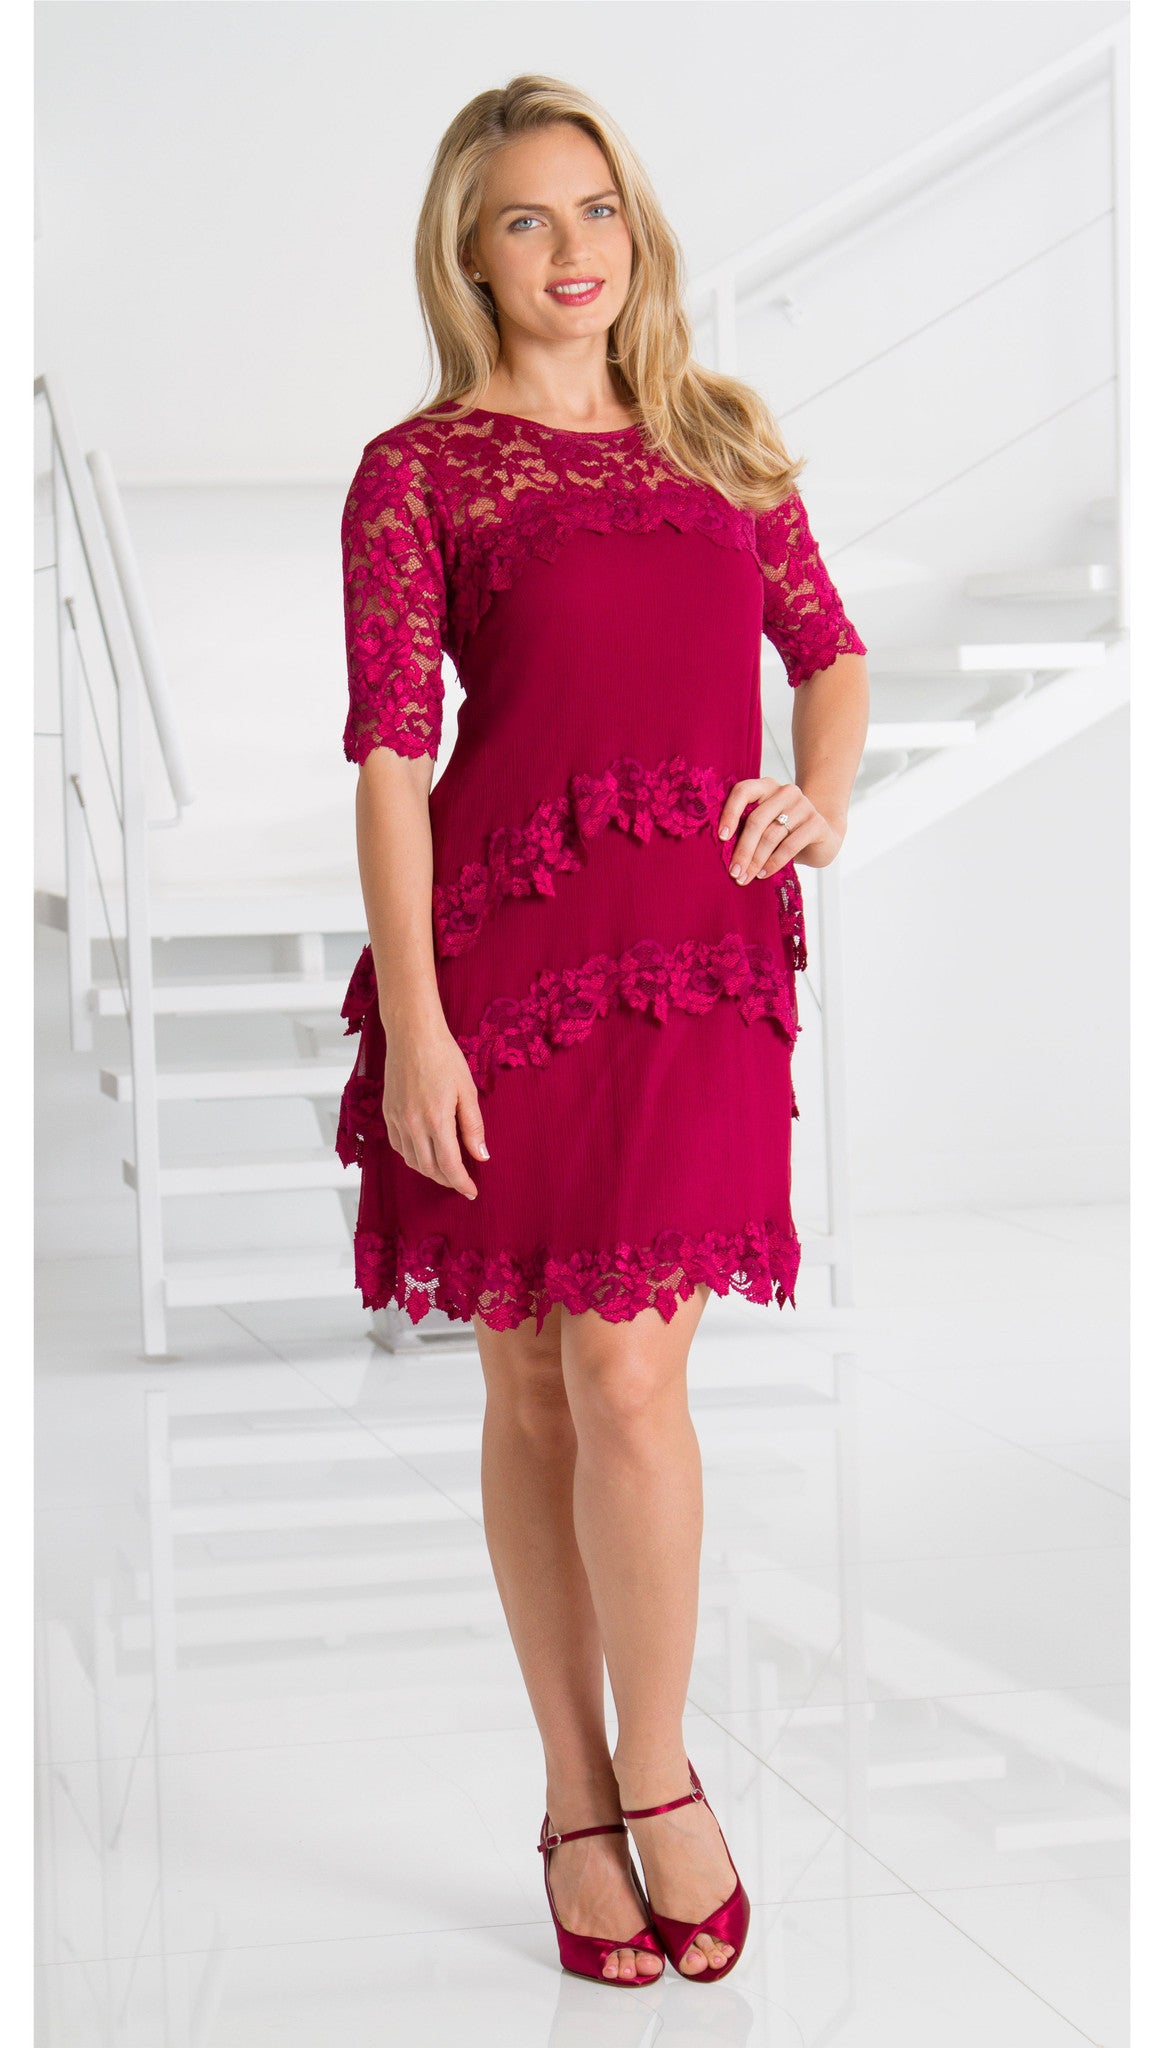 French Lace Dress   D643 - Sara Mique Evening Wear